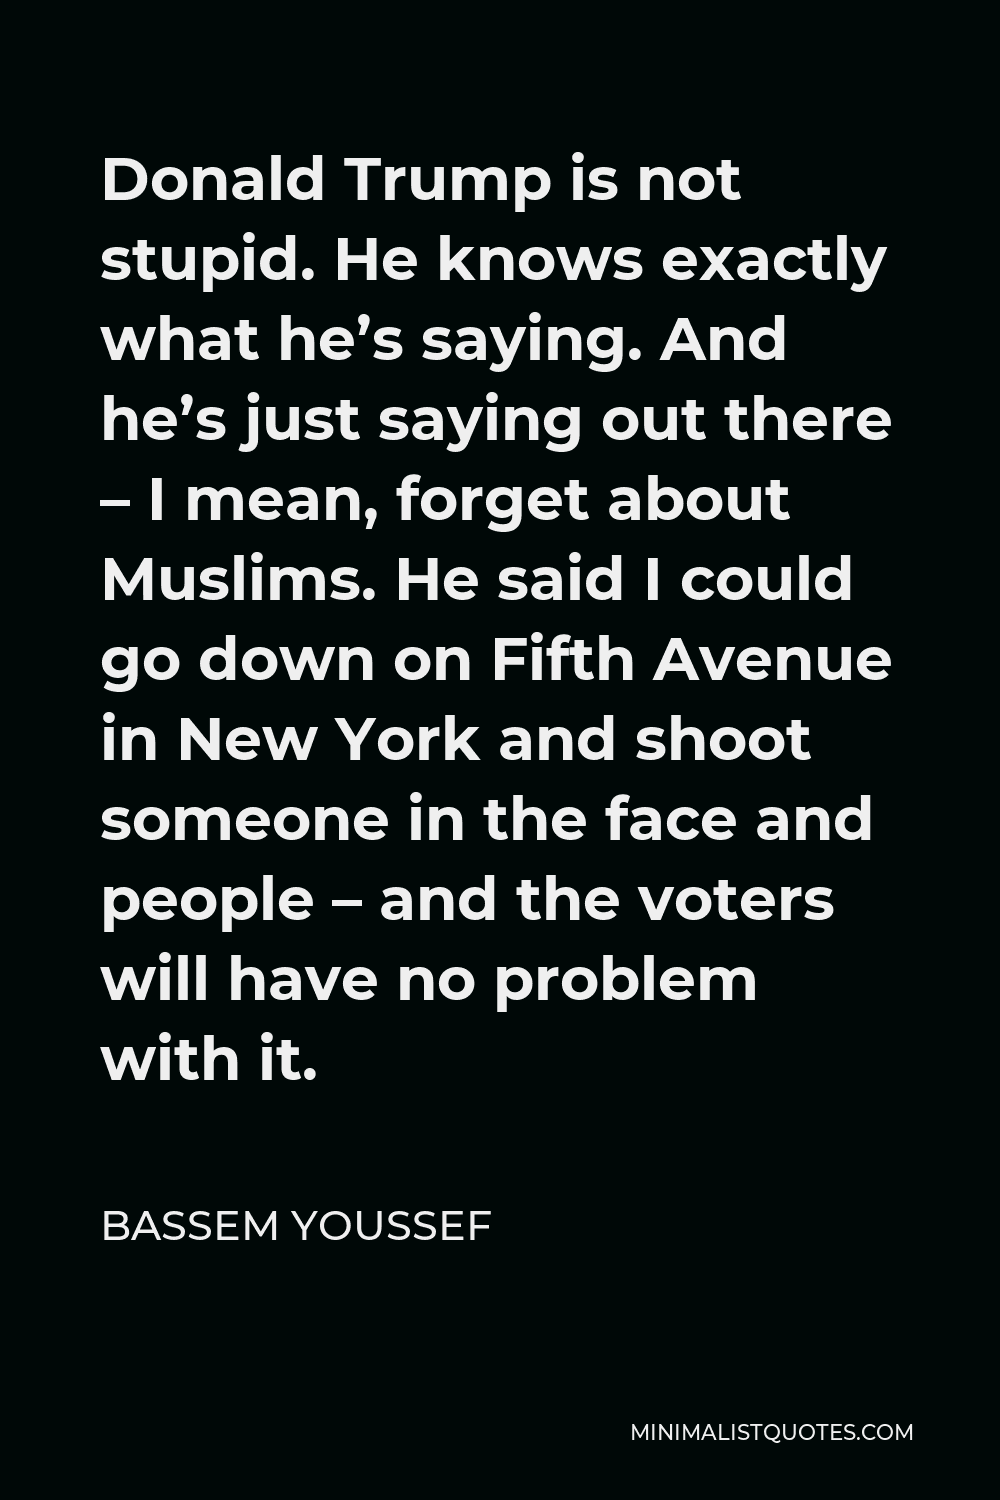 Bassem Youssef Quote - Donald Trump is not stupid. He knows exactly what he’s saying. And he’s just saying out there – I mean, forget about Muslims. He said I could go down on Fifth Avenue in New York and shoot someone in the face and people – and the voters will have no problem with it.